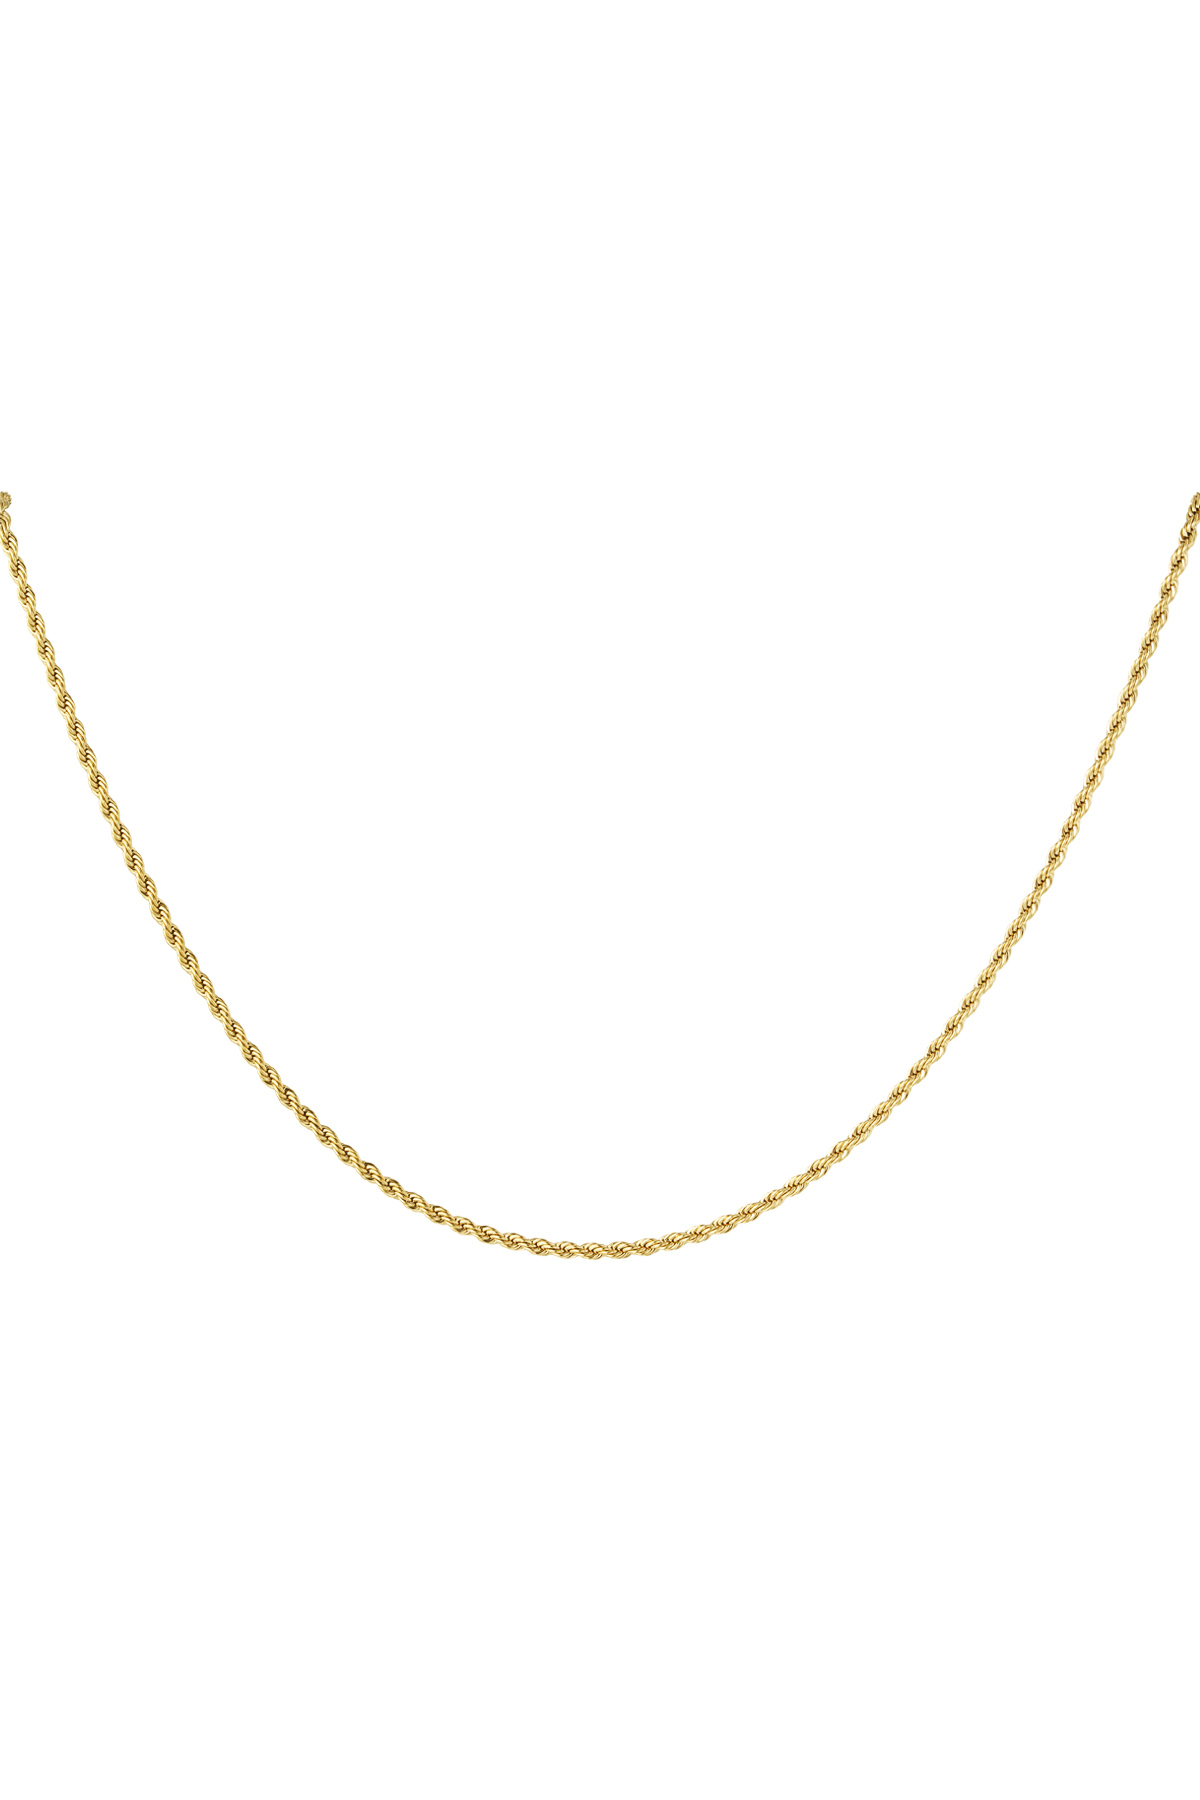 Unisex necklace twisted short - gold-2.0MM h5 